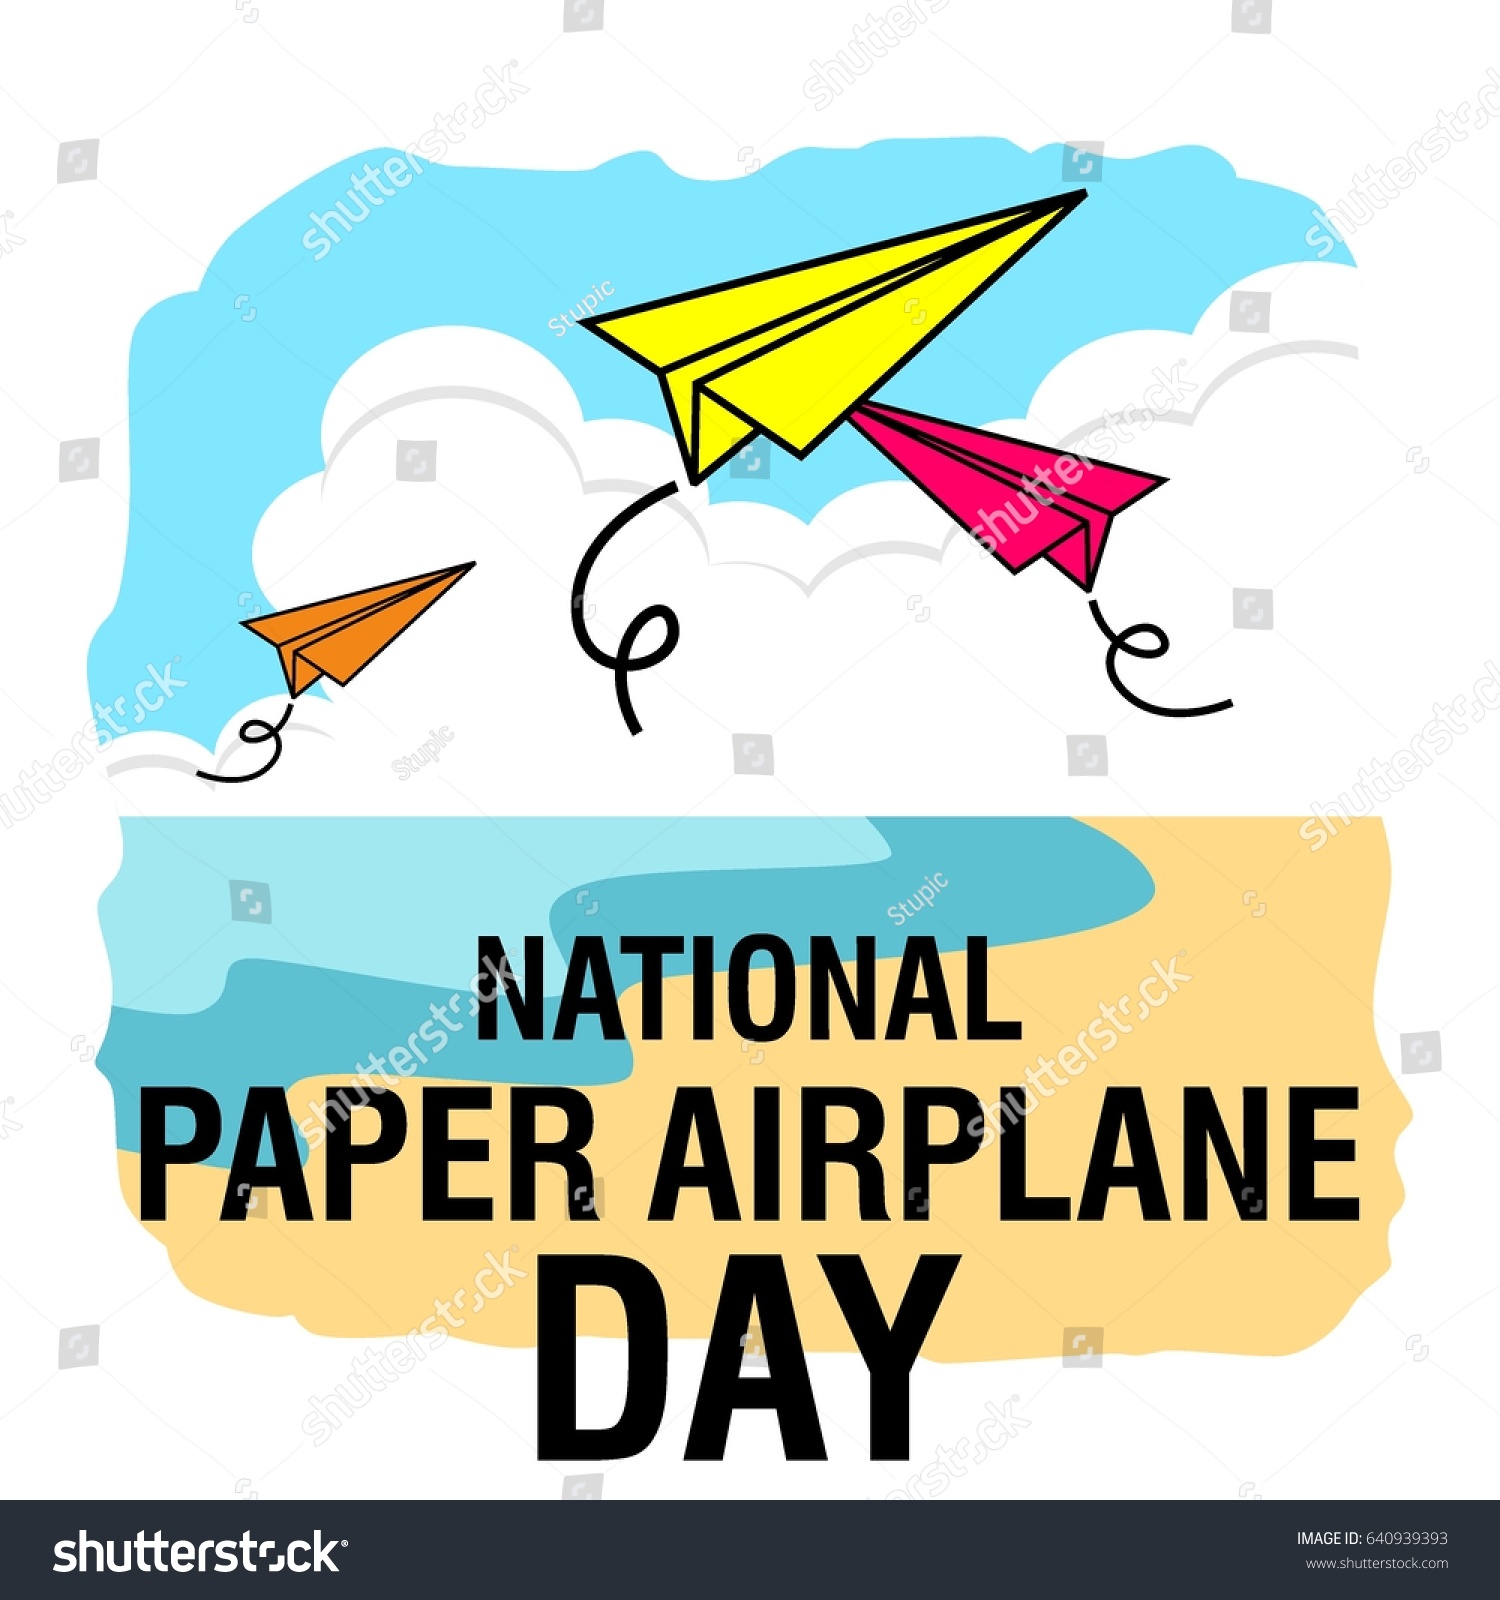 National Paper Airplane Day Illustration Stock Vector (Royalty Free